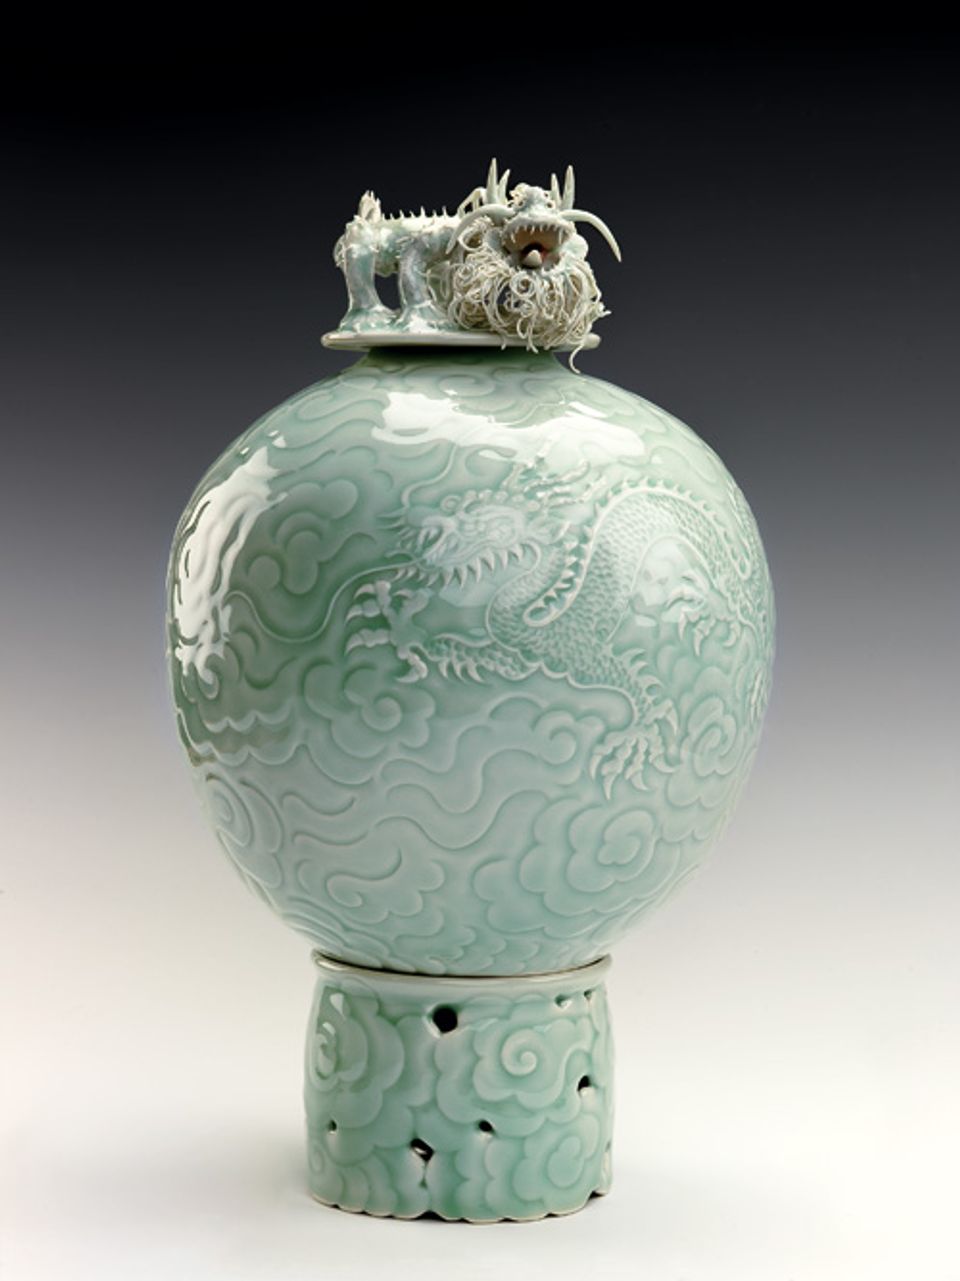 An image of Lee's porcelain object with a dragon embedded in the mold and placed on top.